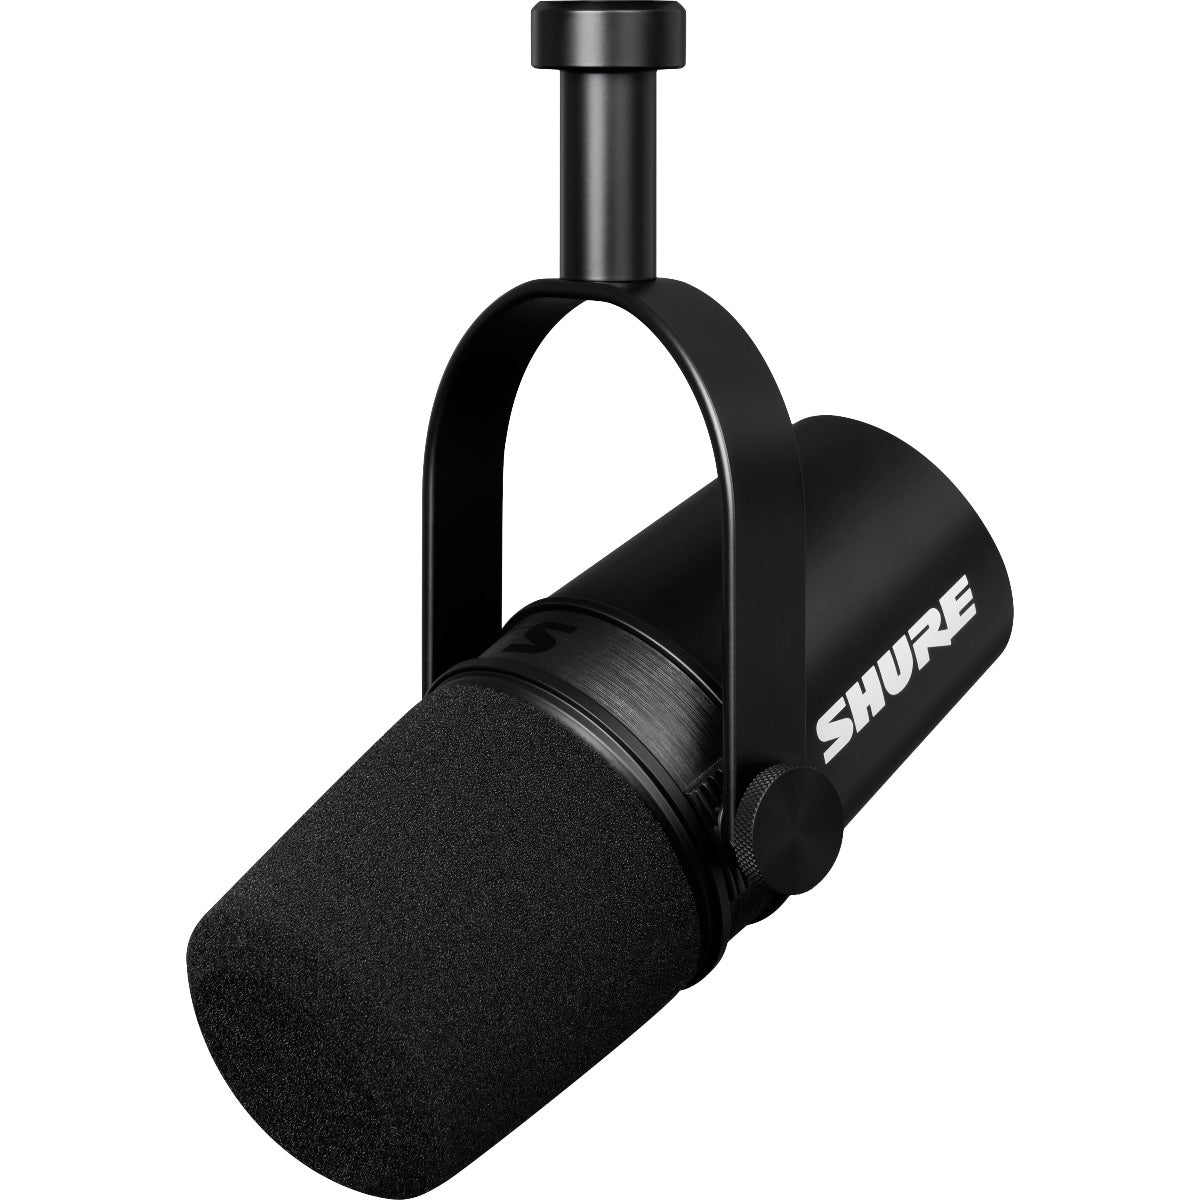 Shure MV7X Podcast Microphone View 1